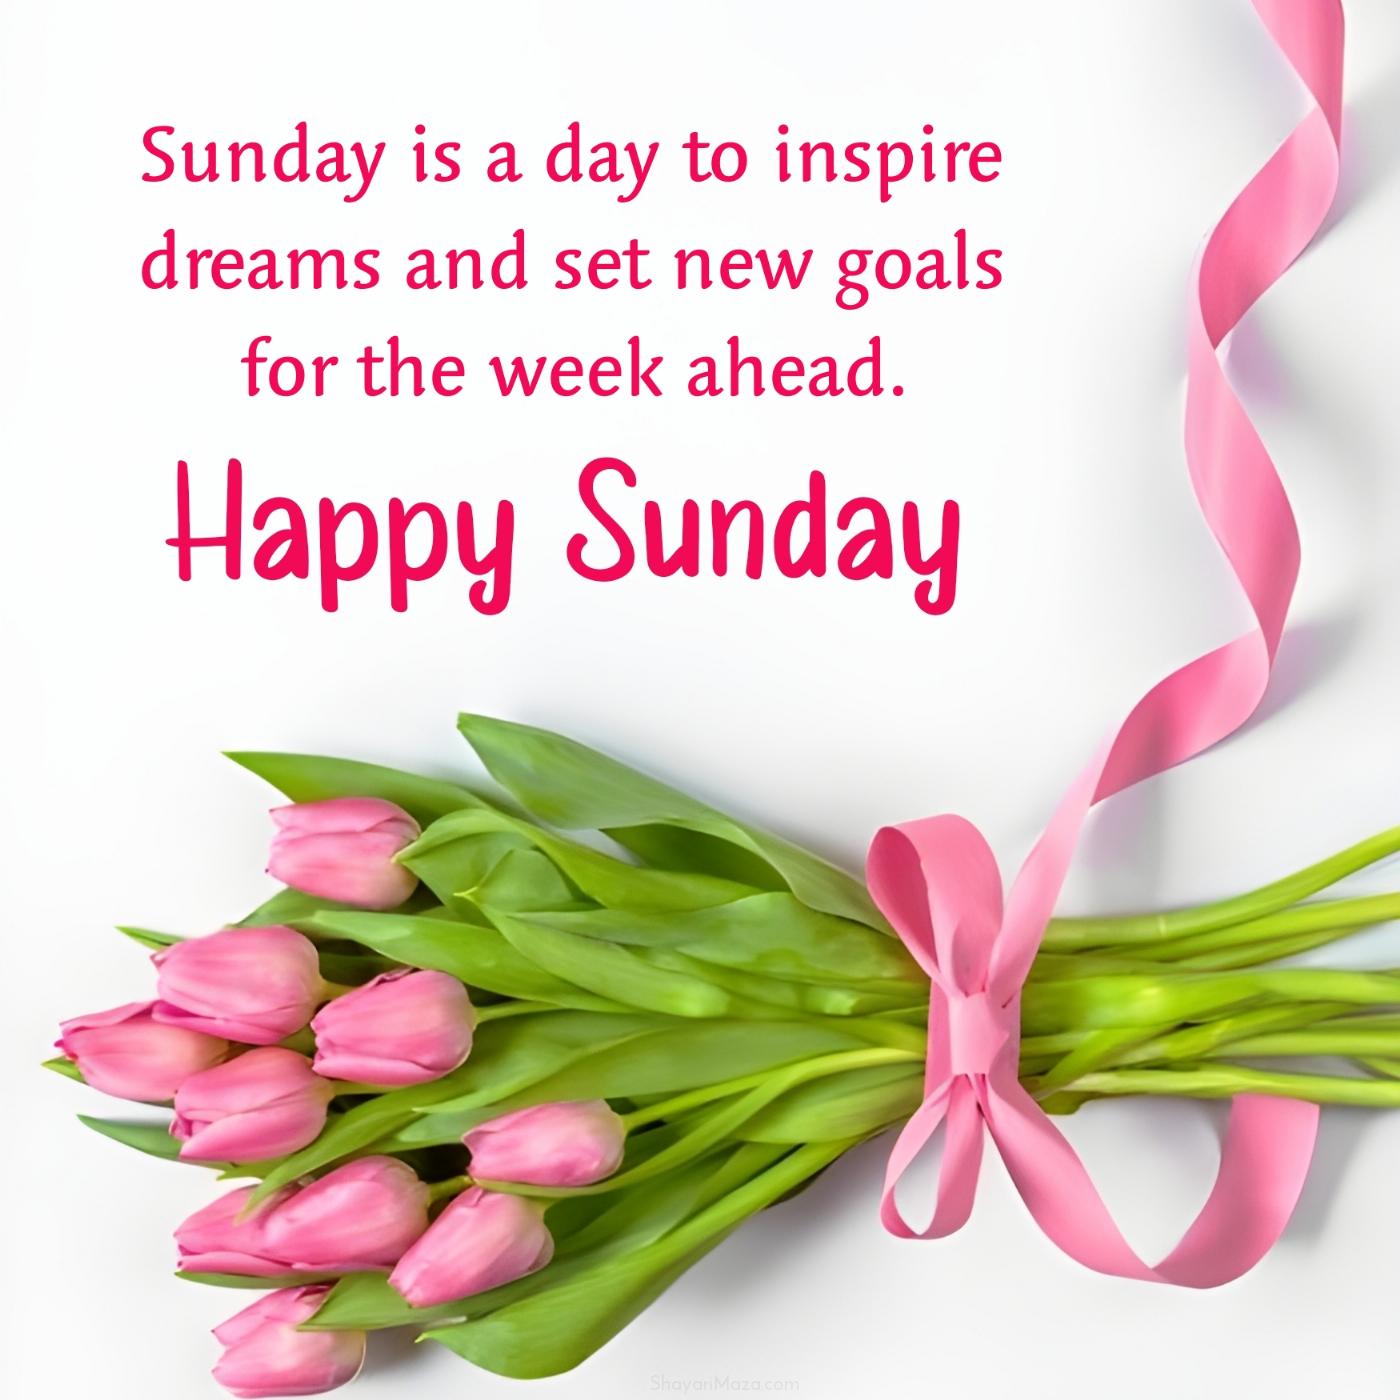 Sunday is a day to inspire dreams and set new goals for the week